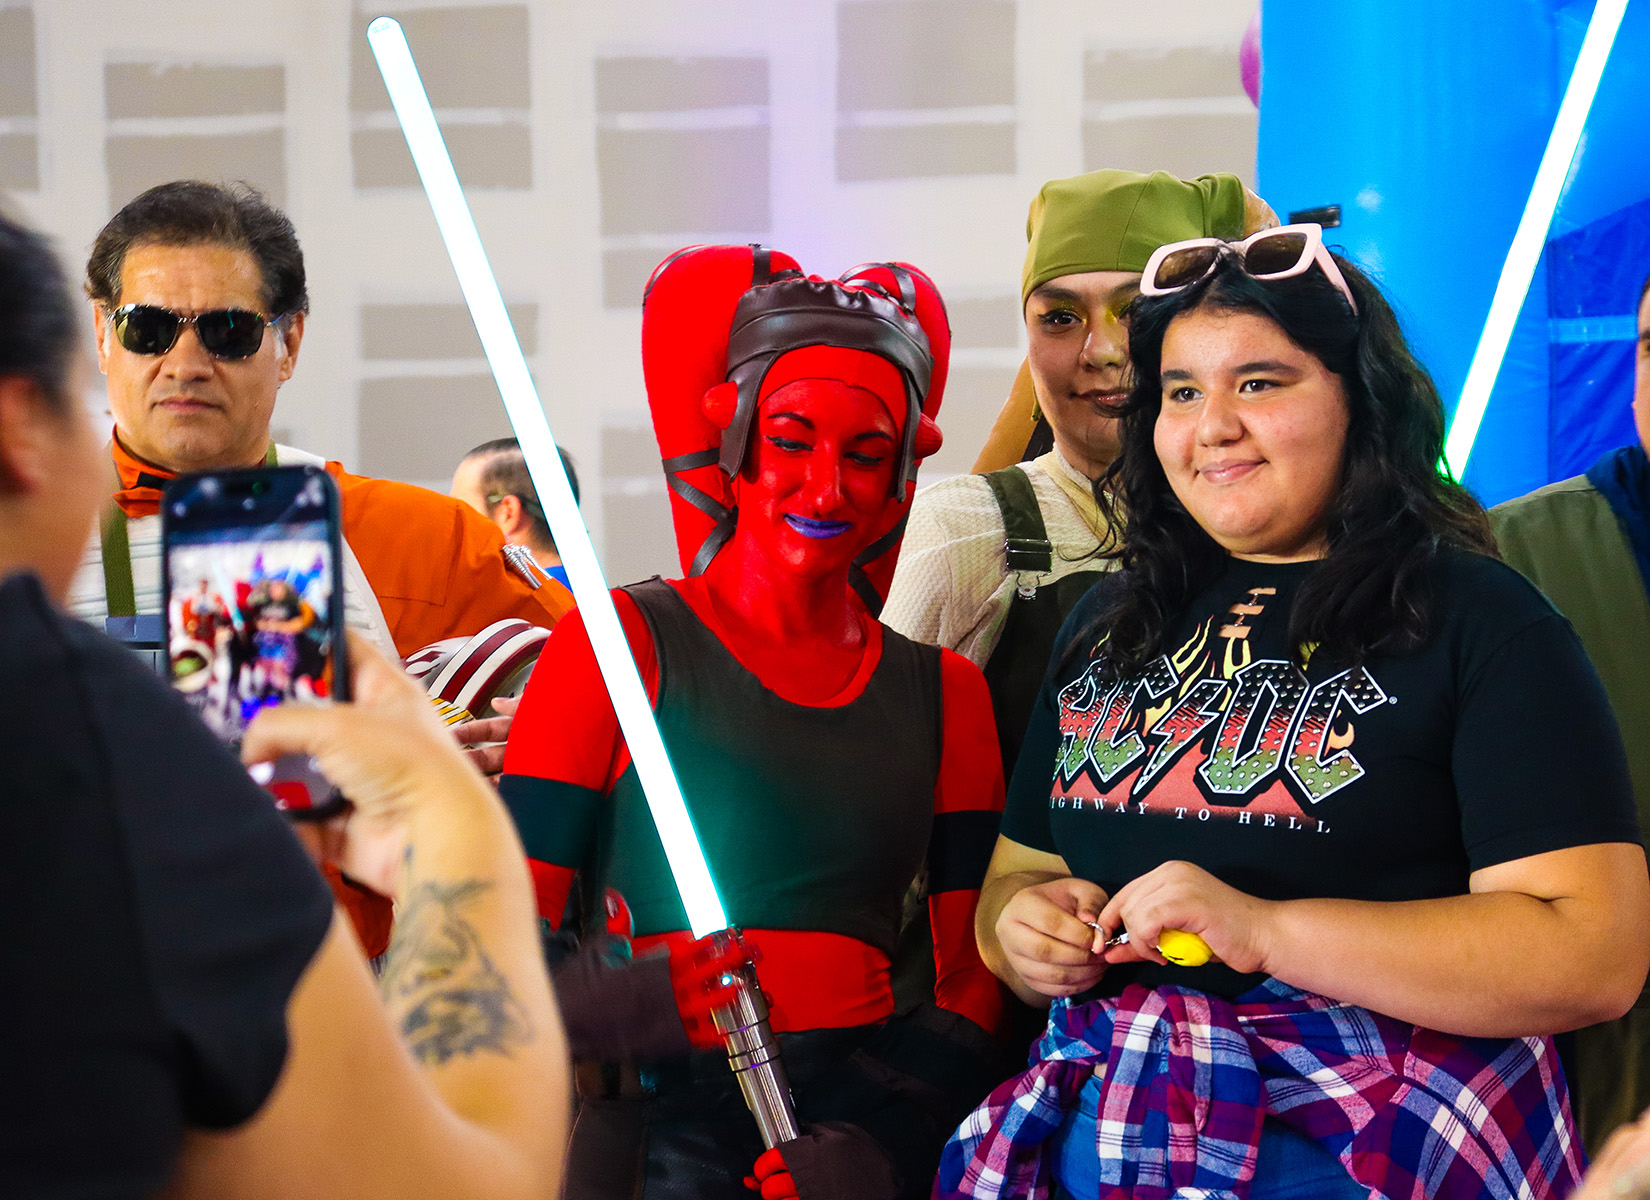 Star Wars characters appear at the El Paso Space Festival for their fans. 